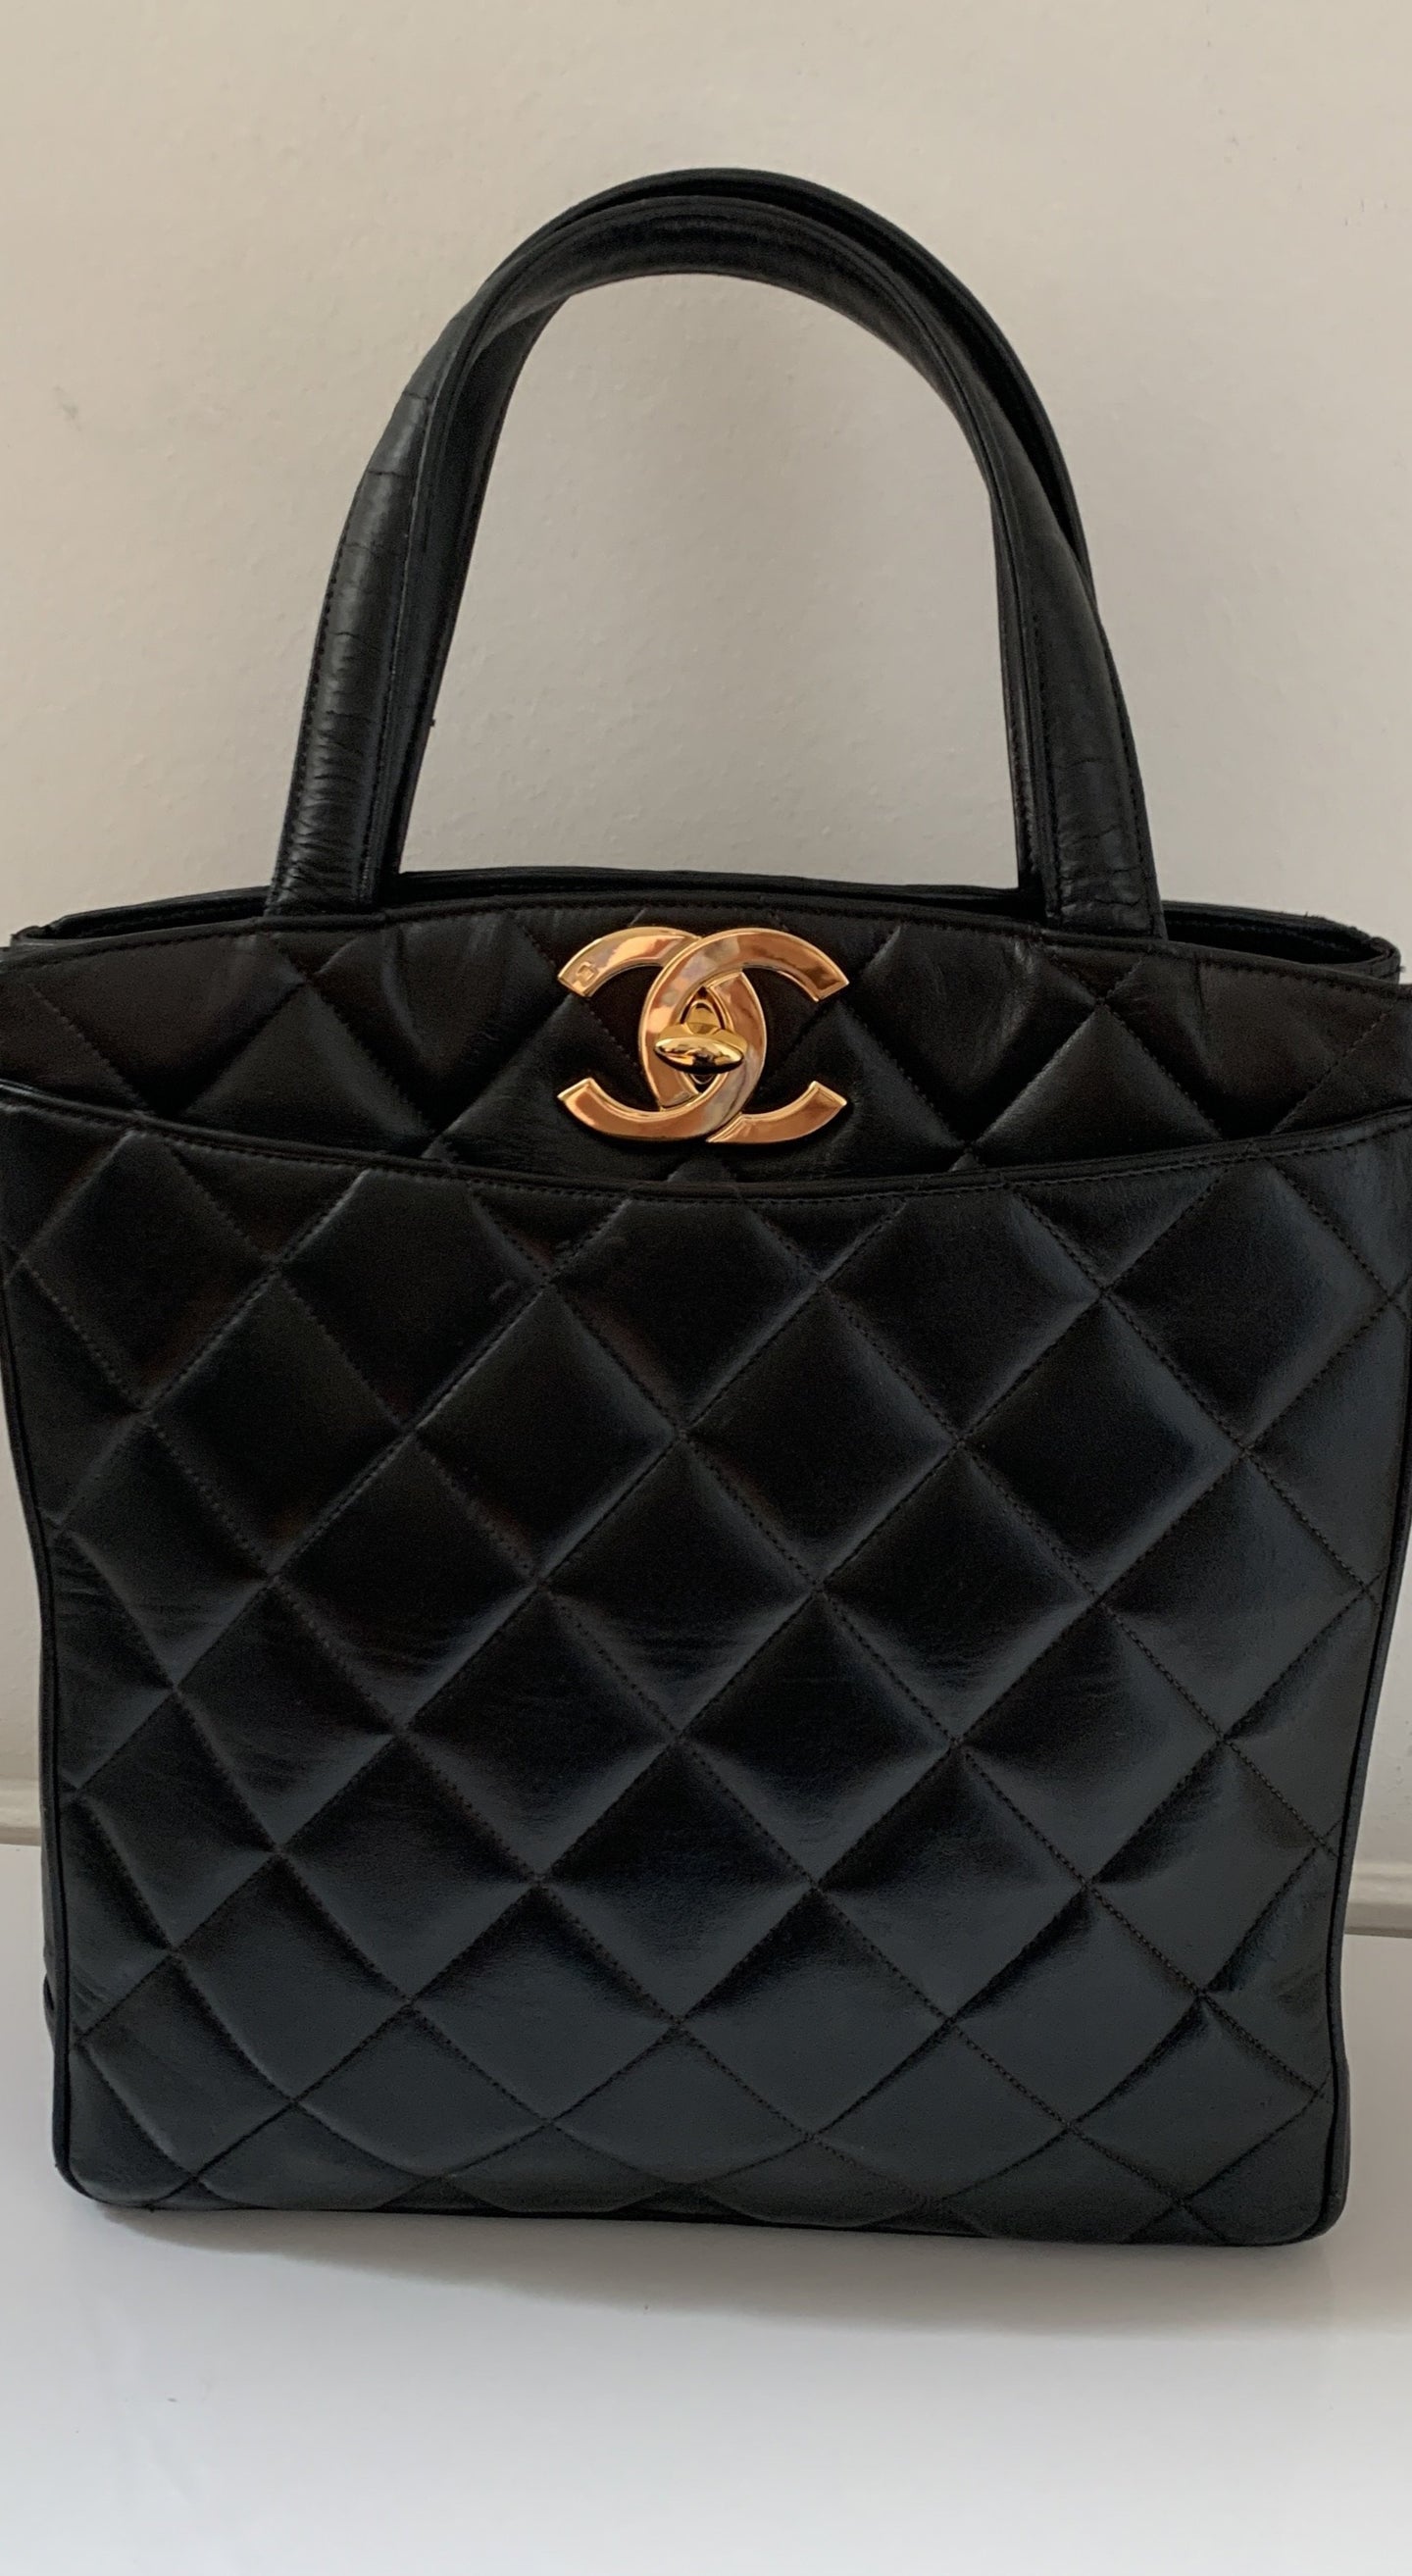 Vintage Chanel quilted tote bag black with gold metal hardware , very good condition